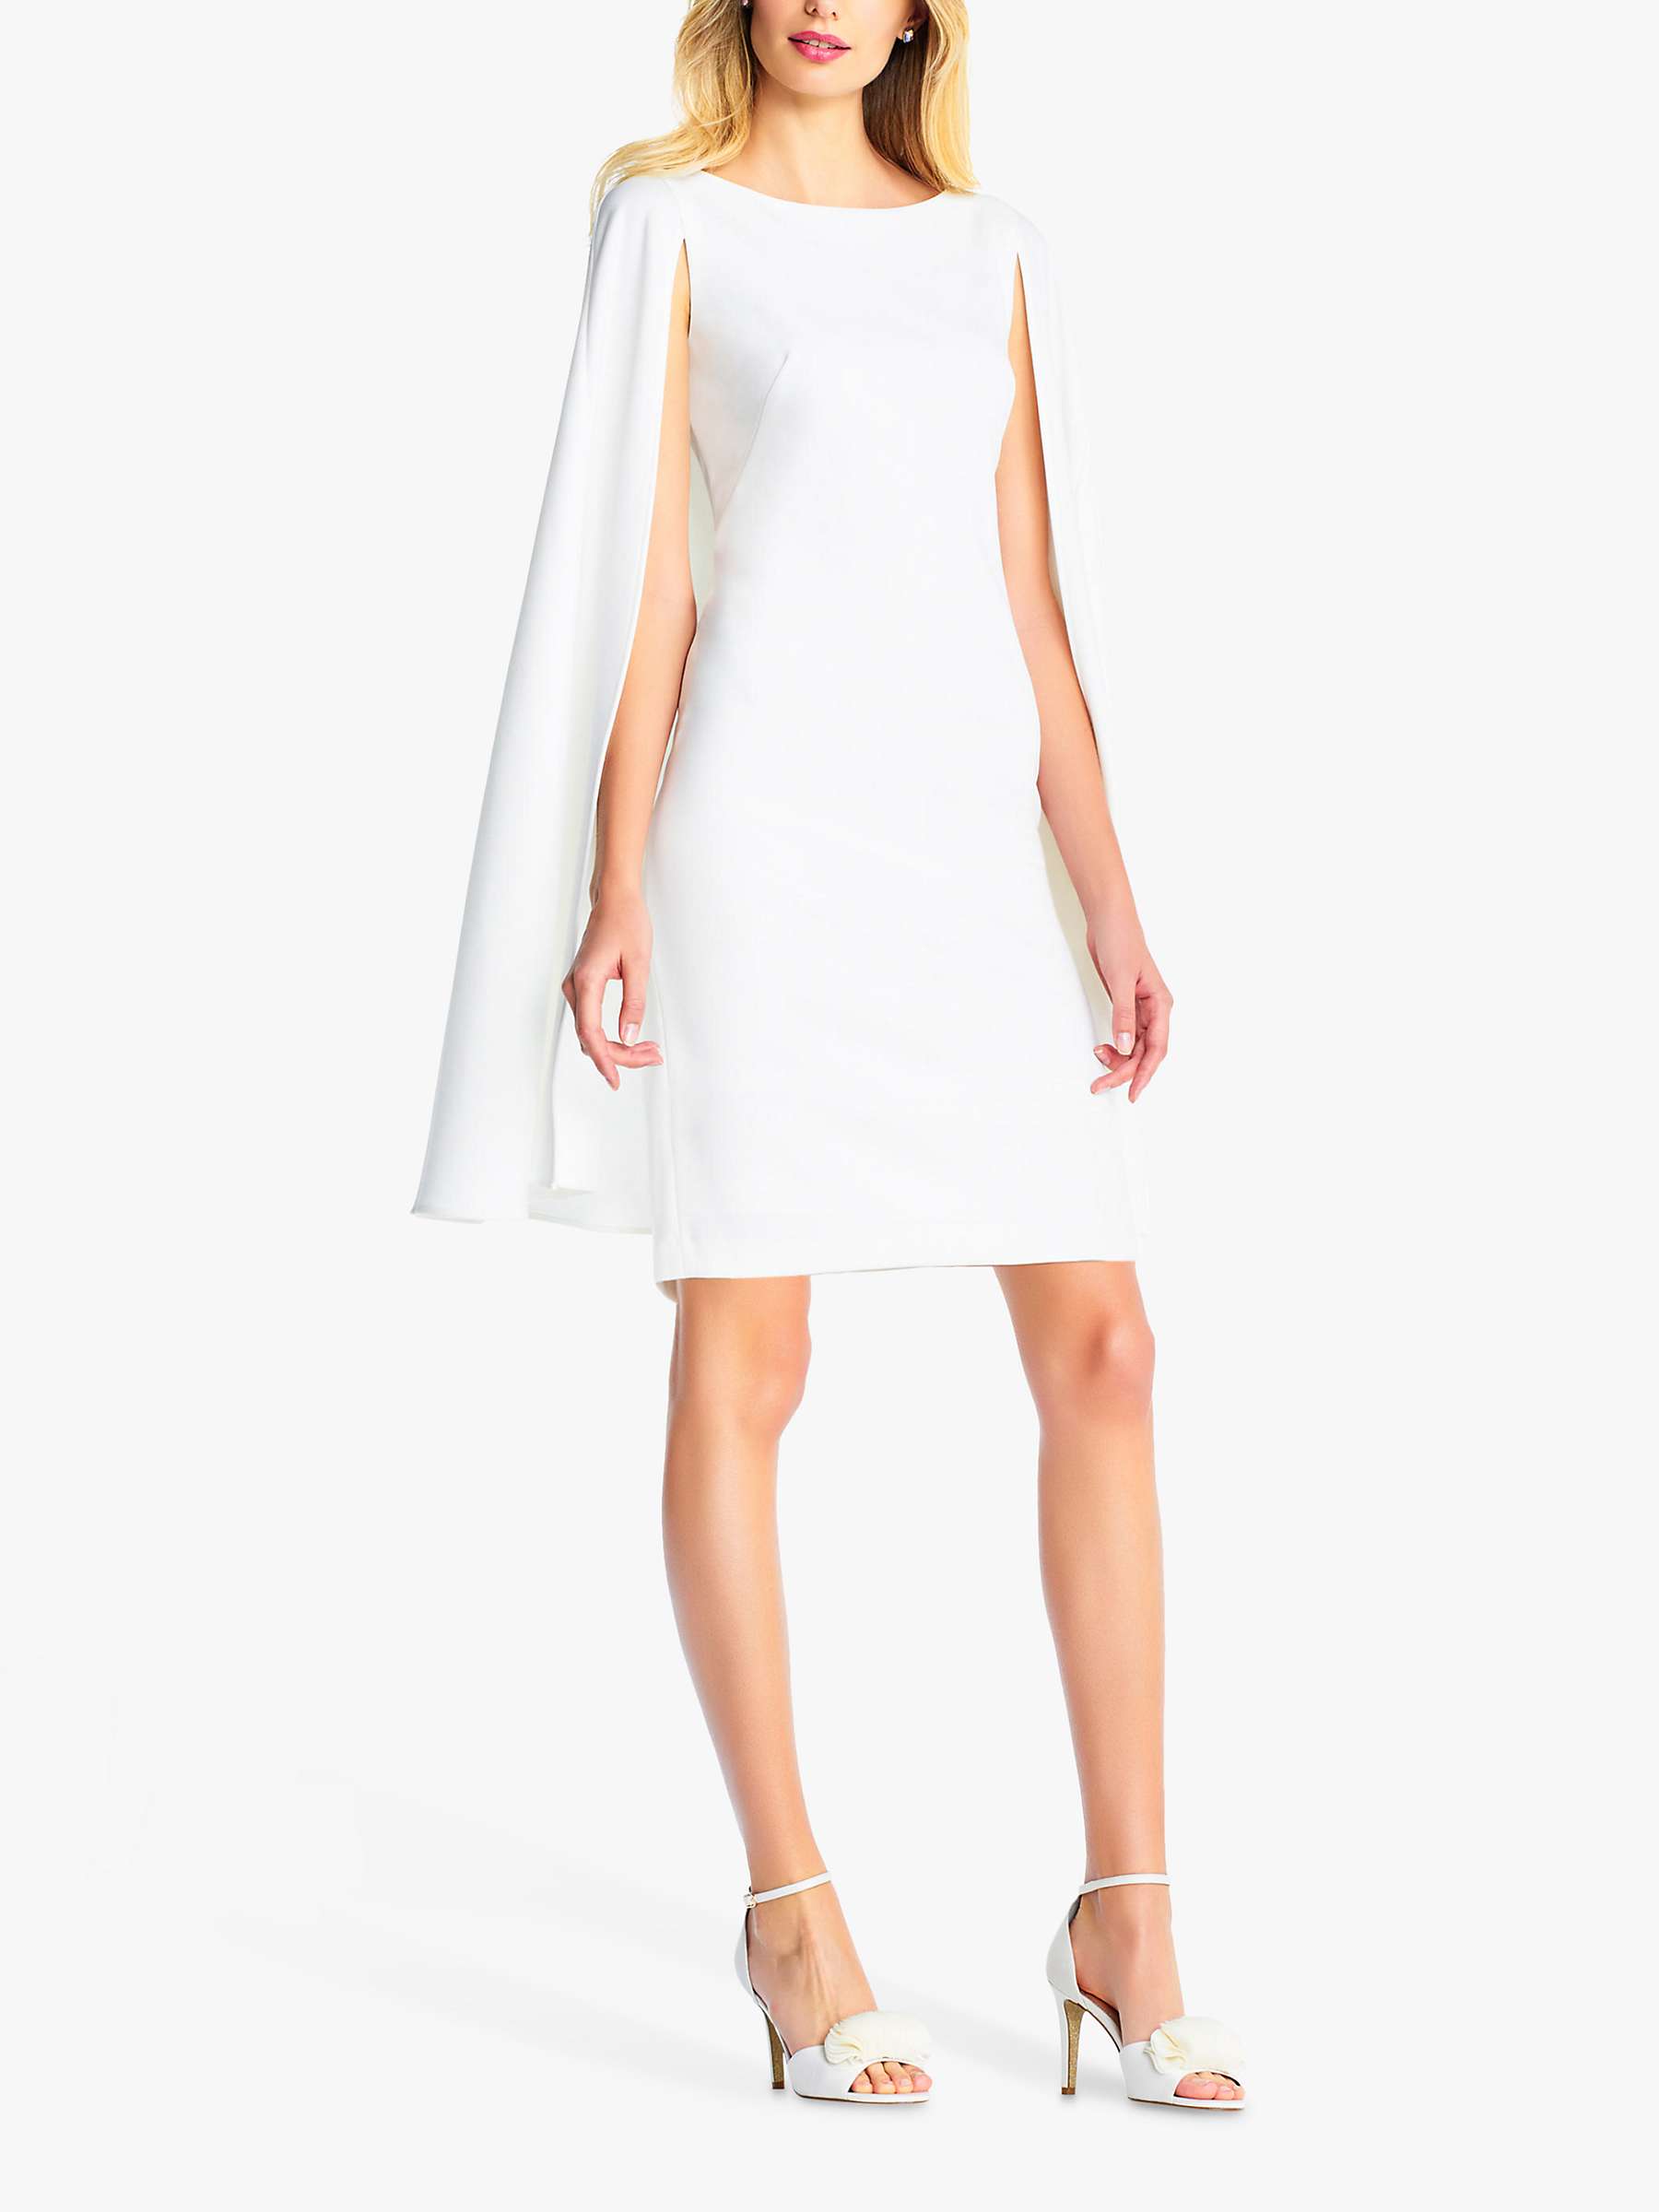 Buy Adrianna Papell Cape Cocktail Dress Online at johnlewis.com